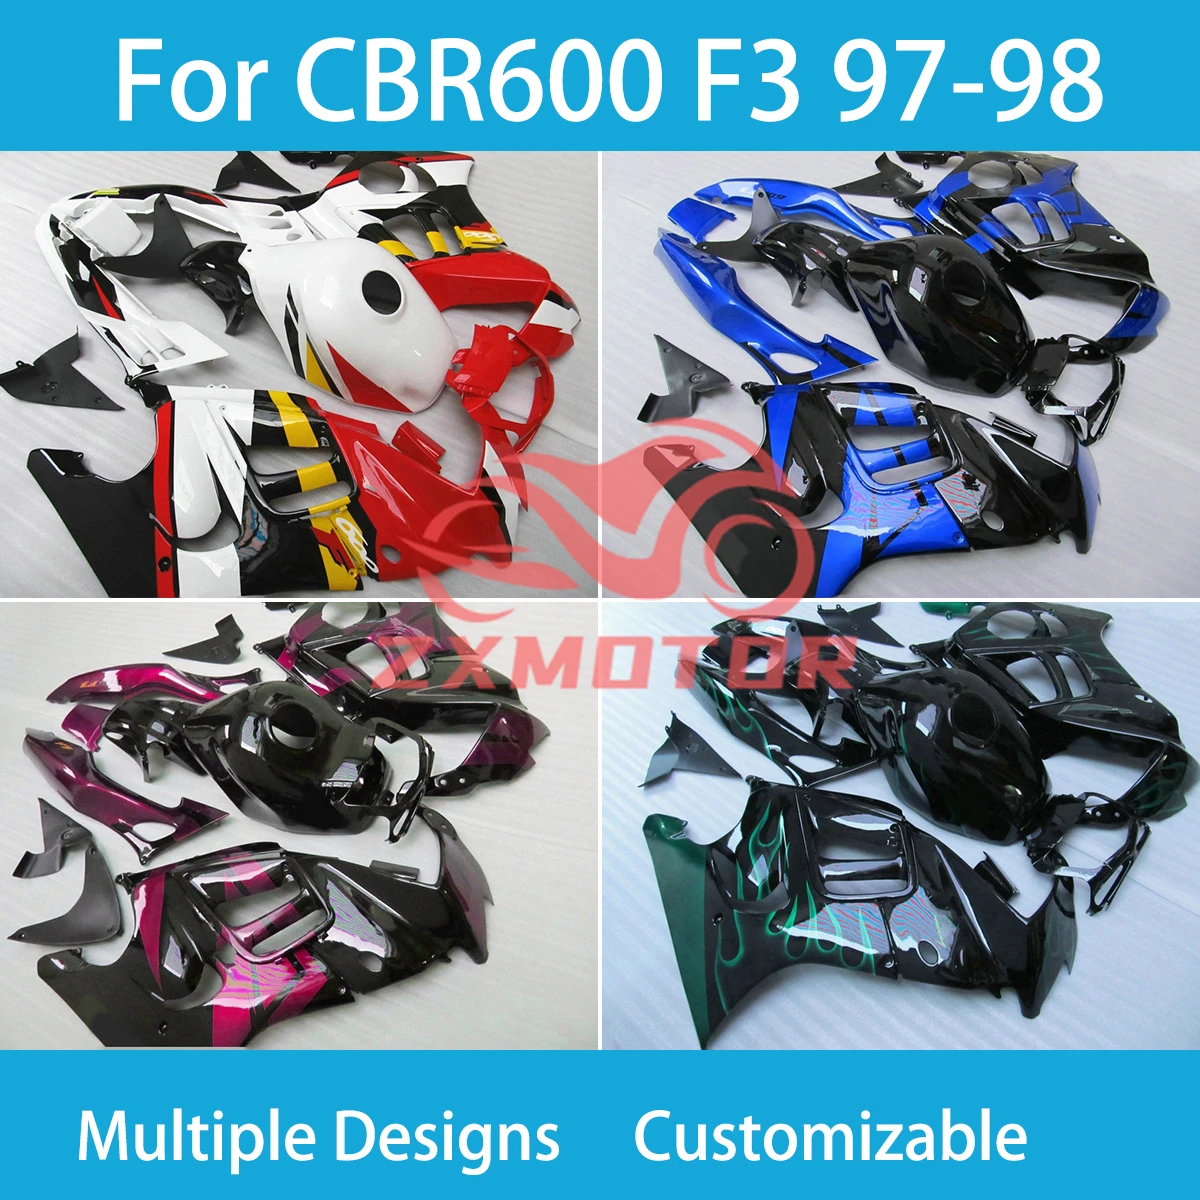 

ABS Fairings for Honda CBR 600 F3 97 98 Motorcycle Fairing Kit ABS Injection Bodywork Set Complete Parts CBR600 F3 1997 1998